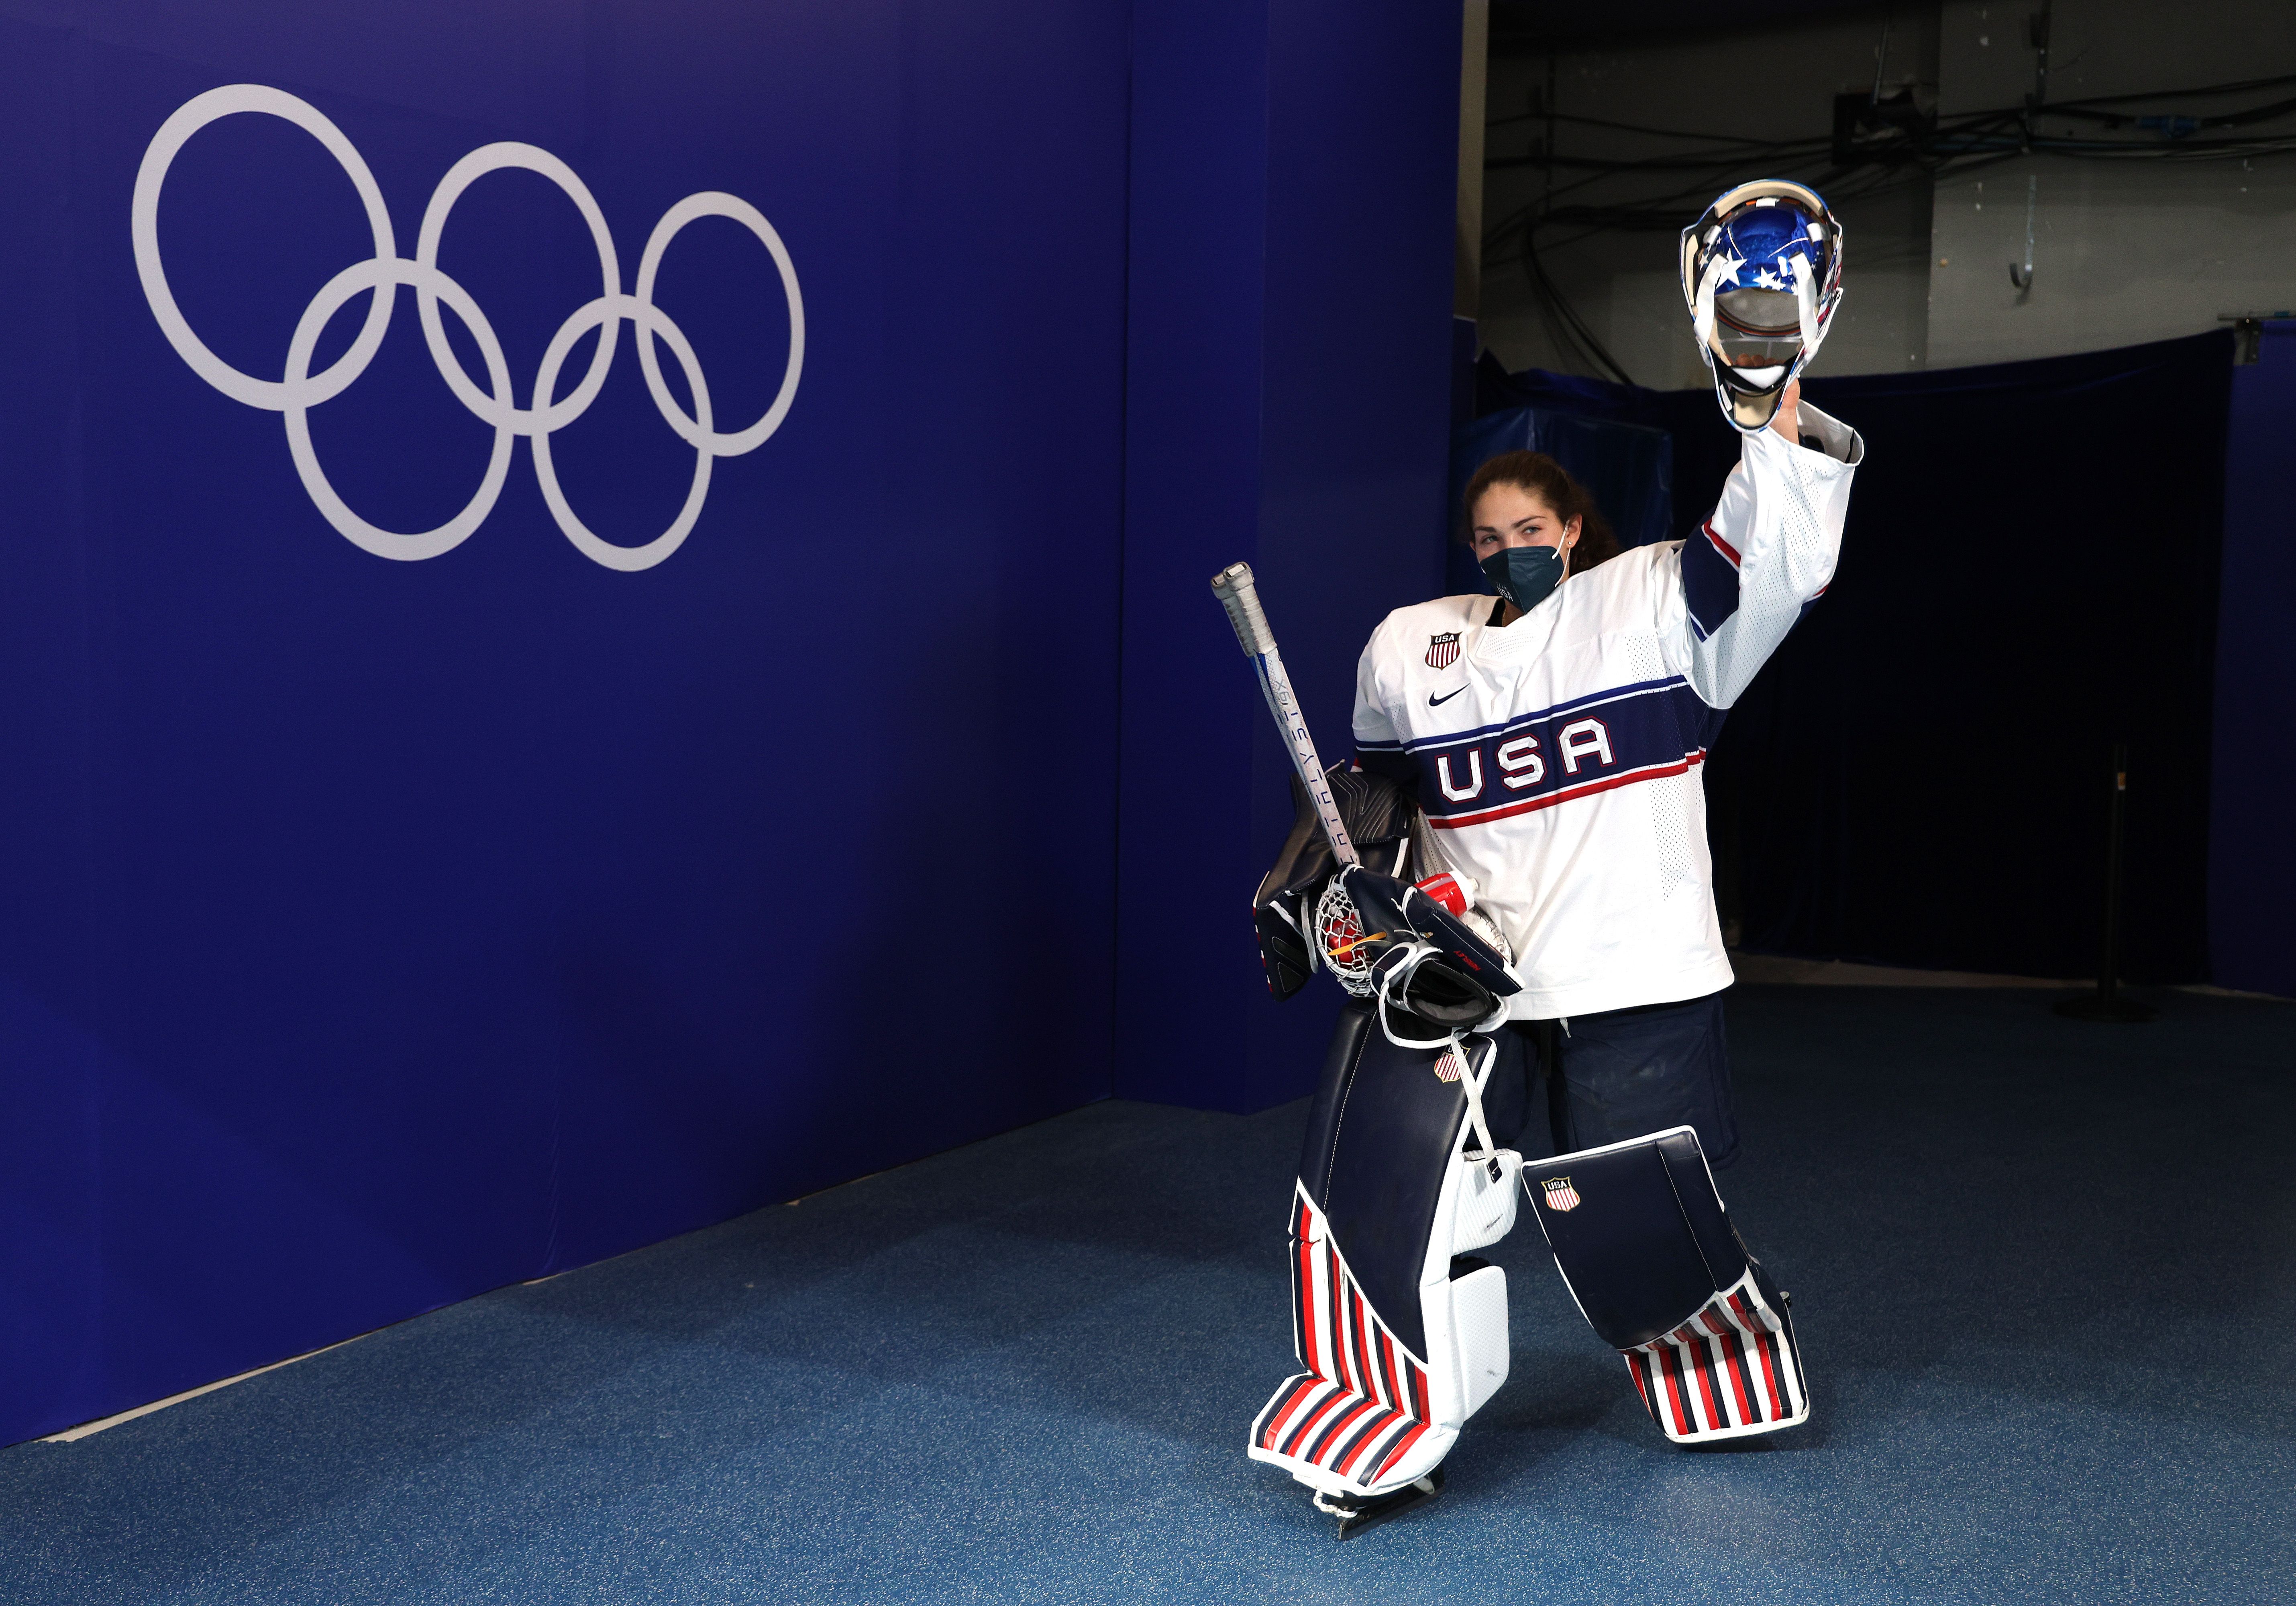 Nicole Hensley #29 of Team United States waves as she makes her way to the ice in preparation for the 2022 Beijing Winter Olympics 